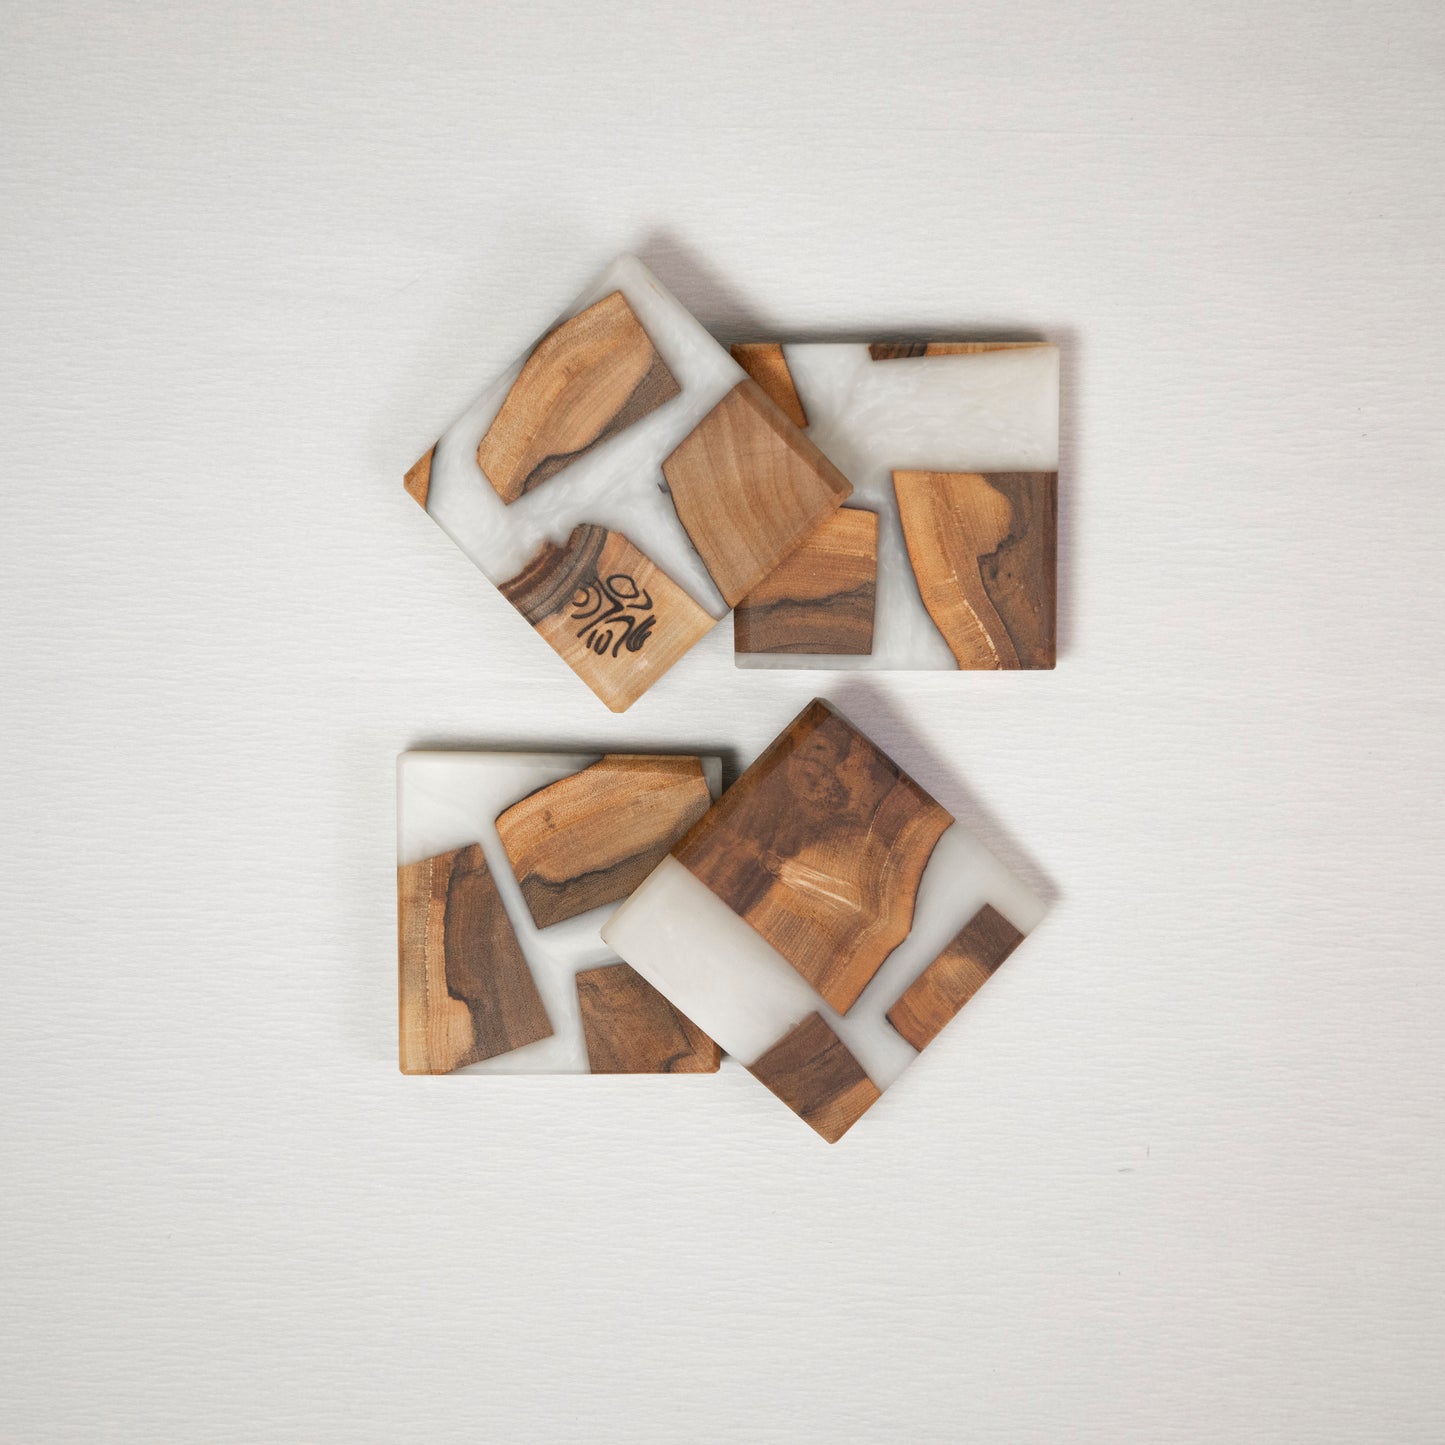 Four coasters made from wood and epoxy resin in the color nobel white